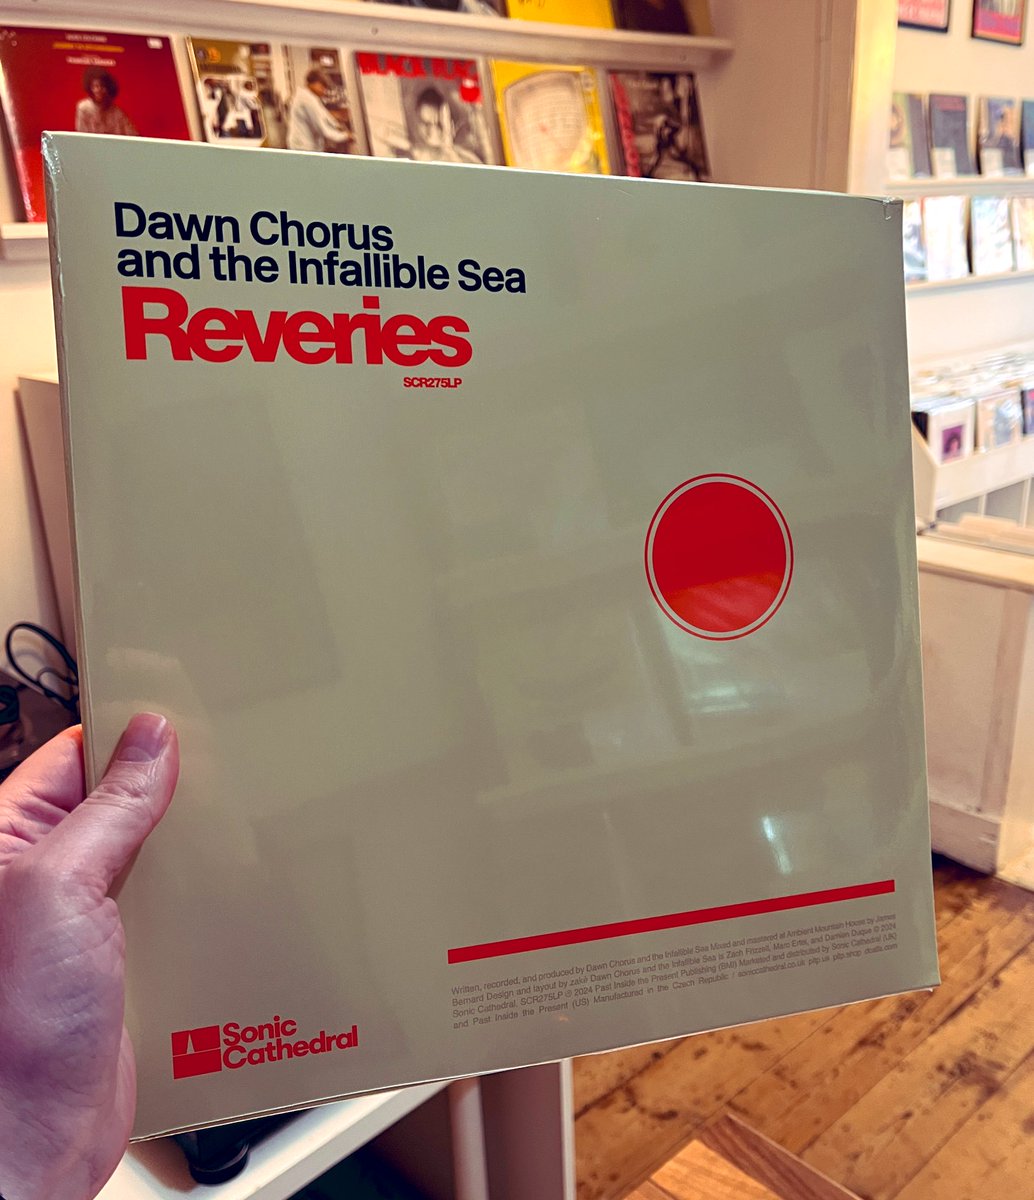 Record of the week! @dcatisofficial - Reveries southrecordshop.com/products/dawn-… Delicately textured and slowly unfurling sonic vistas, occupying a unique aural domain that lies between guitar-driven drone music and modern classical compositions. Out today on @soniccathedral